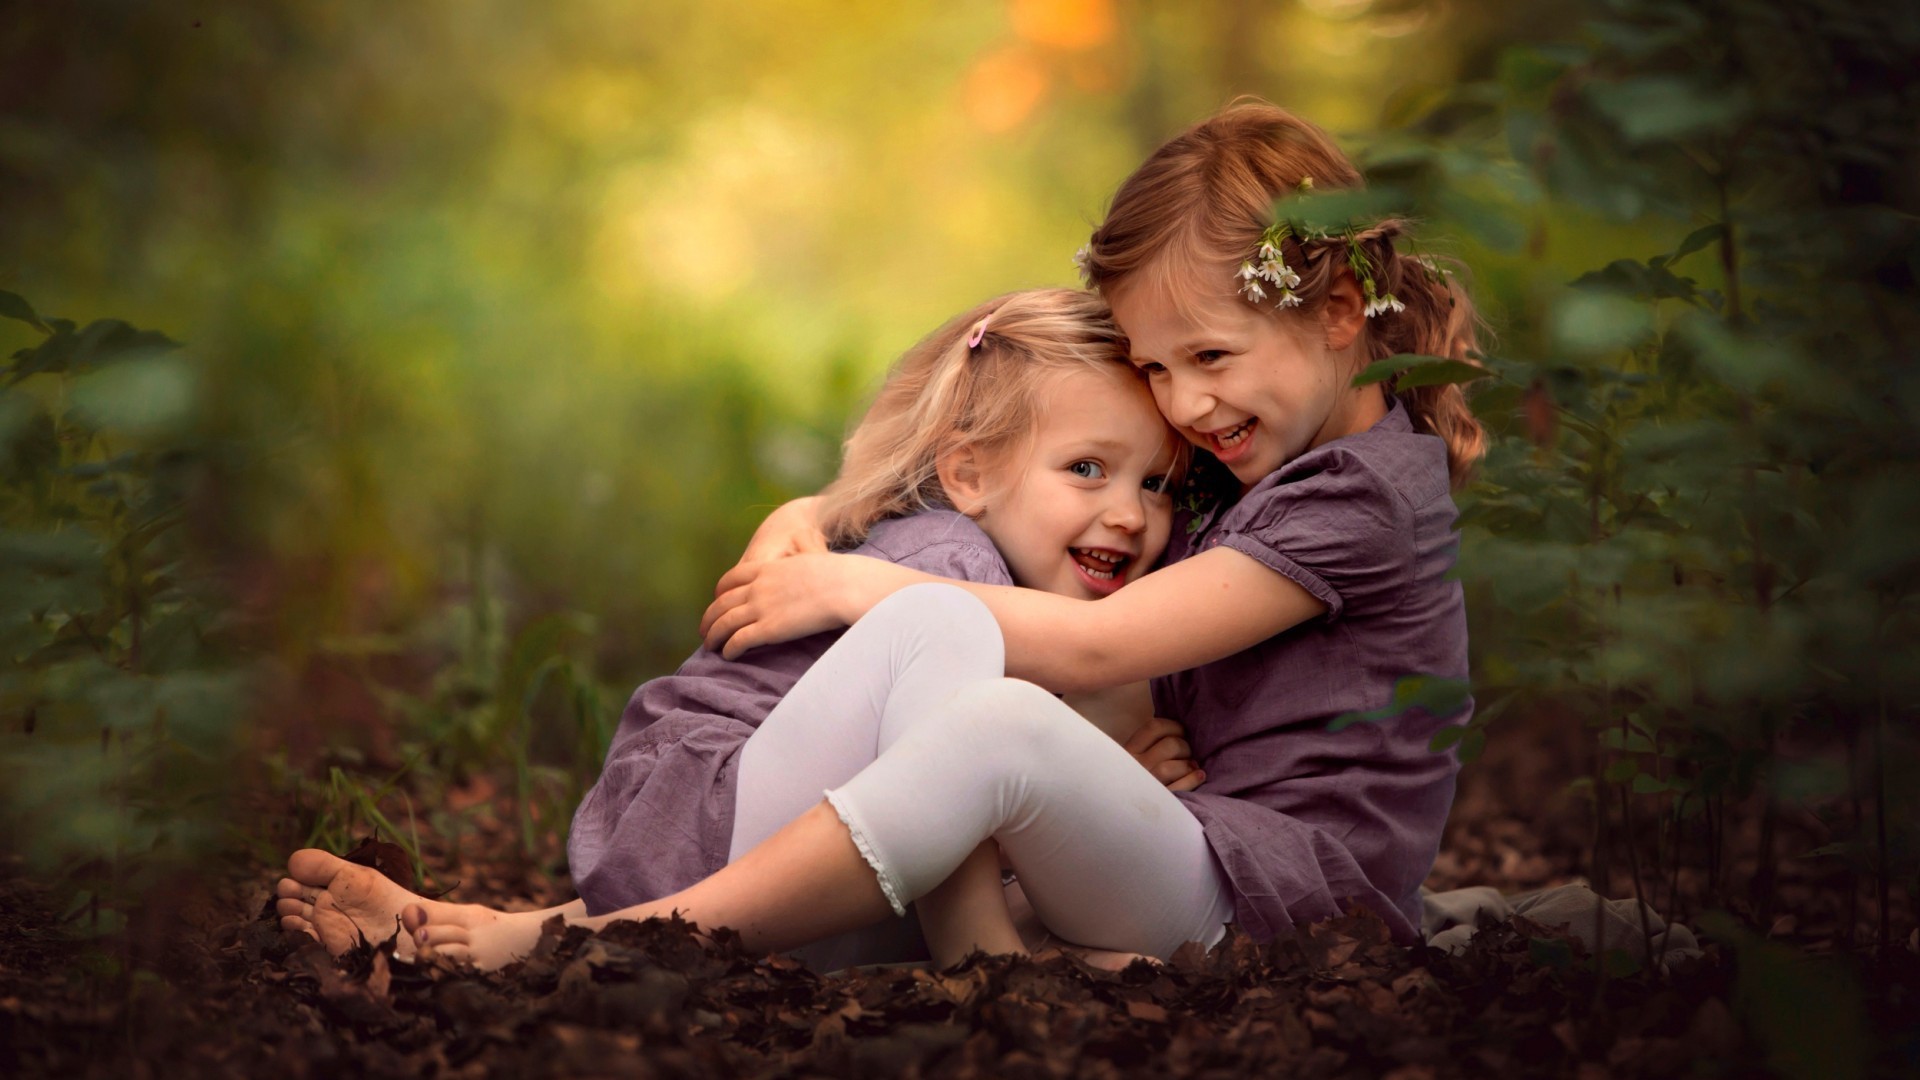 Sisters Wallpapers, Sisters Wallpapers (34+) | Download Free on ...